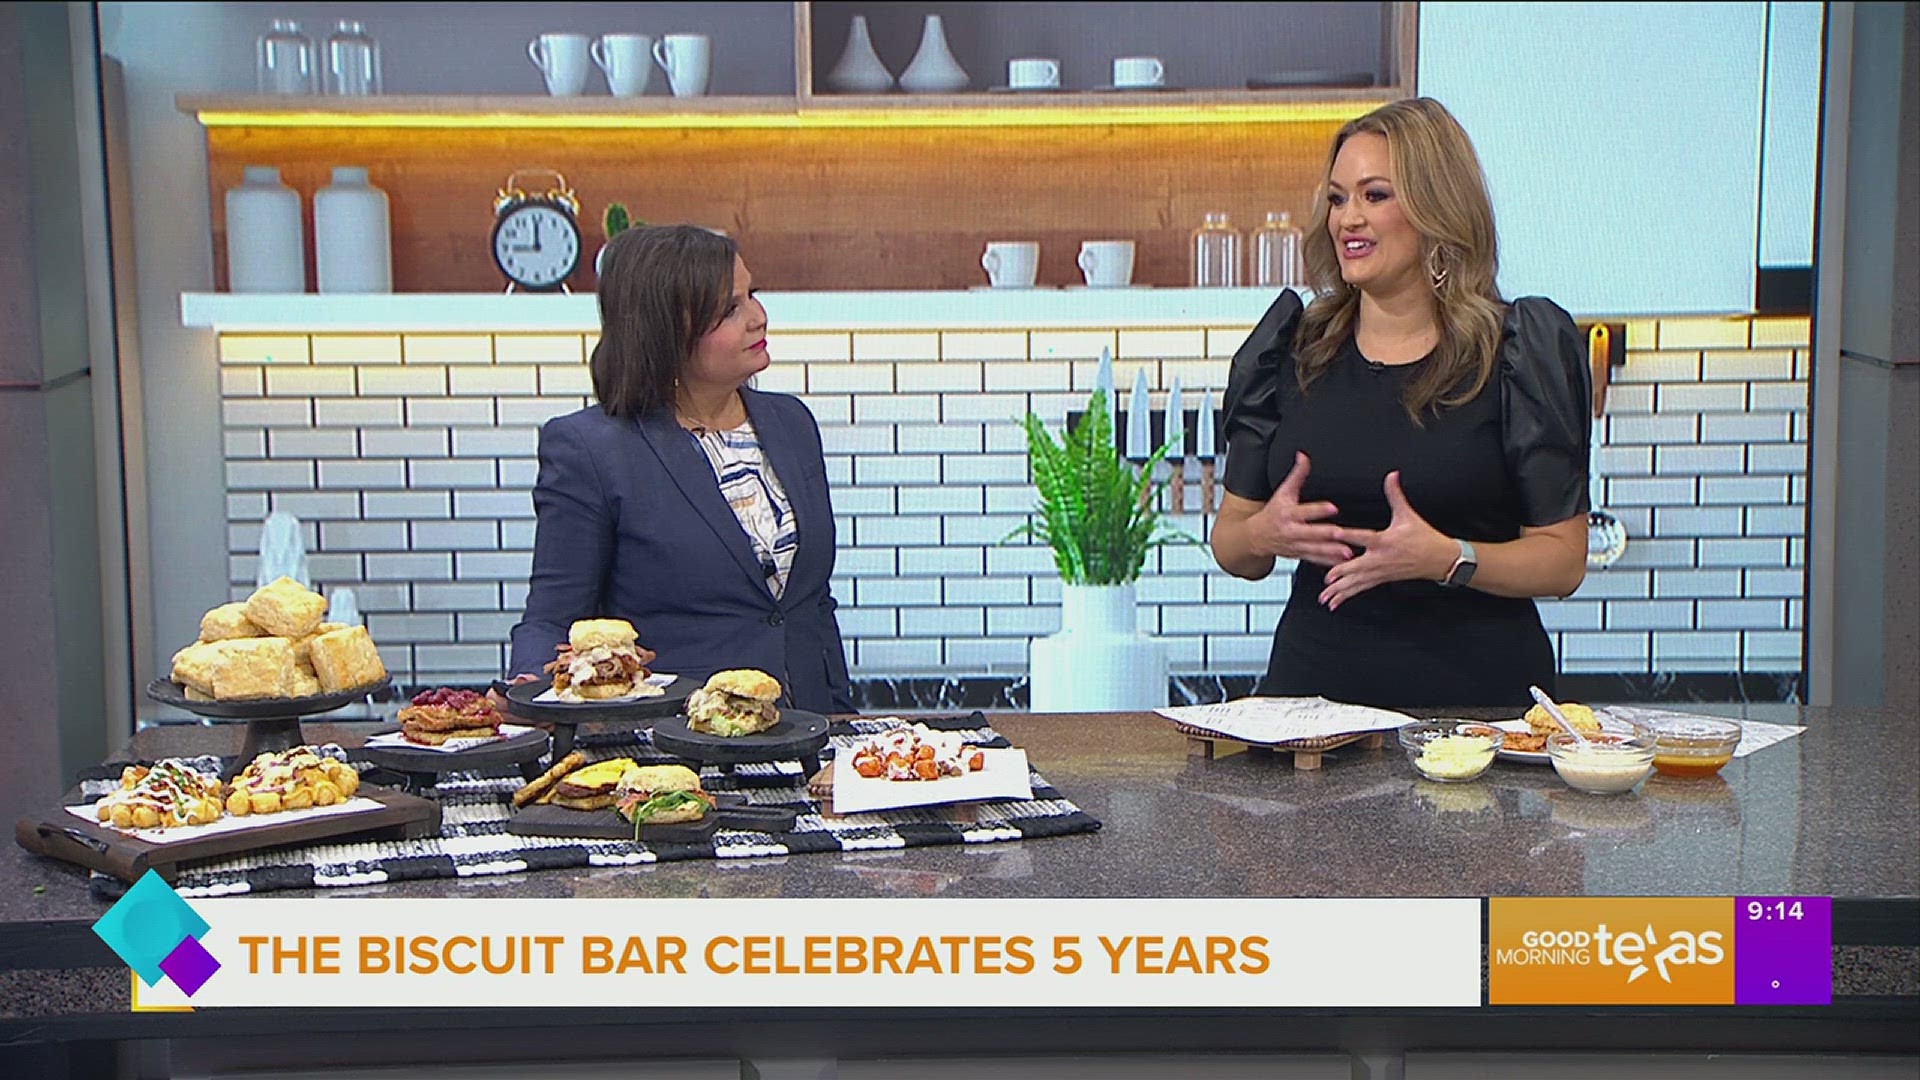 The Biscuit Bar owner Jane Burchett shares their history of good food and giving back